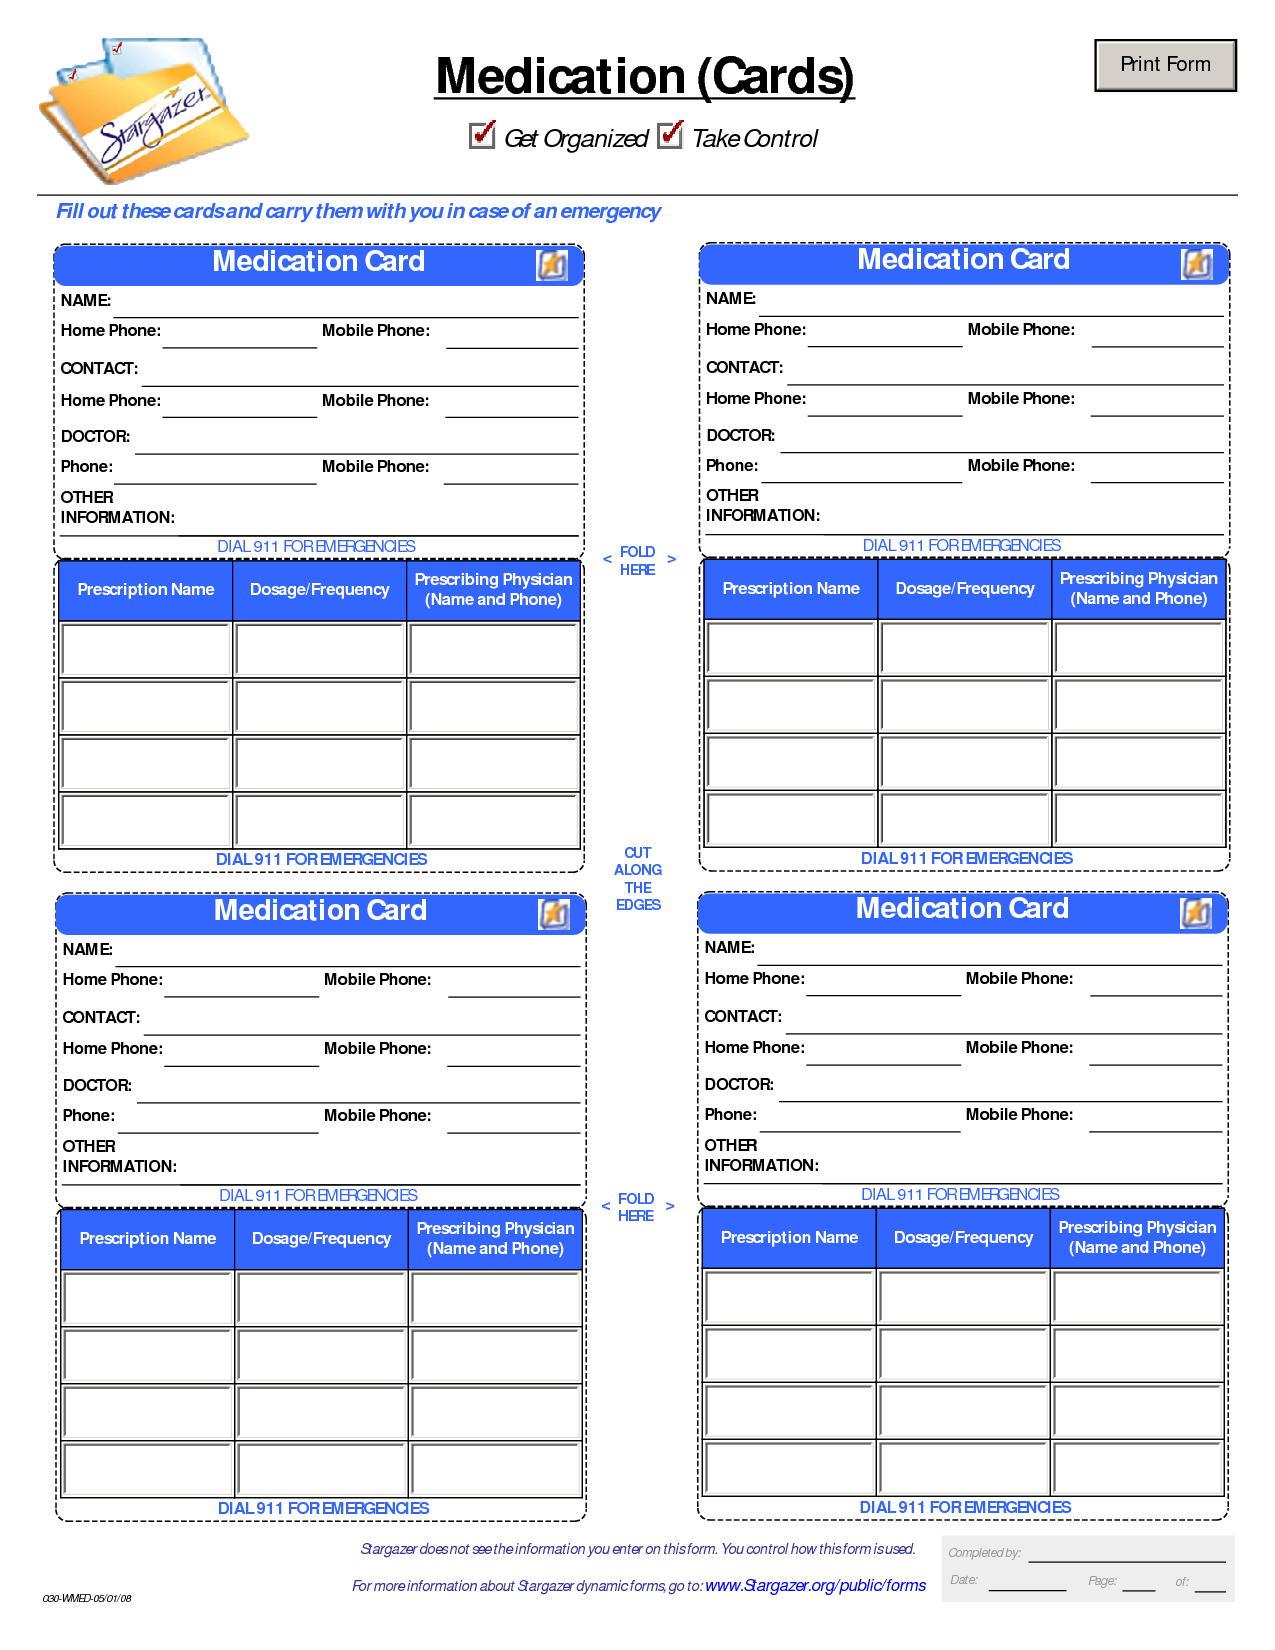 Patient Medication Card Template | Medication List, Medical For Medication Card Template